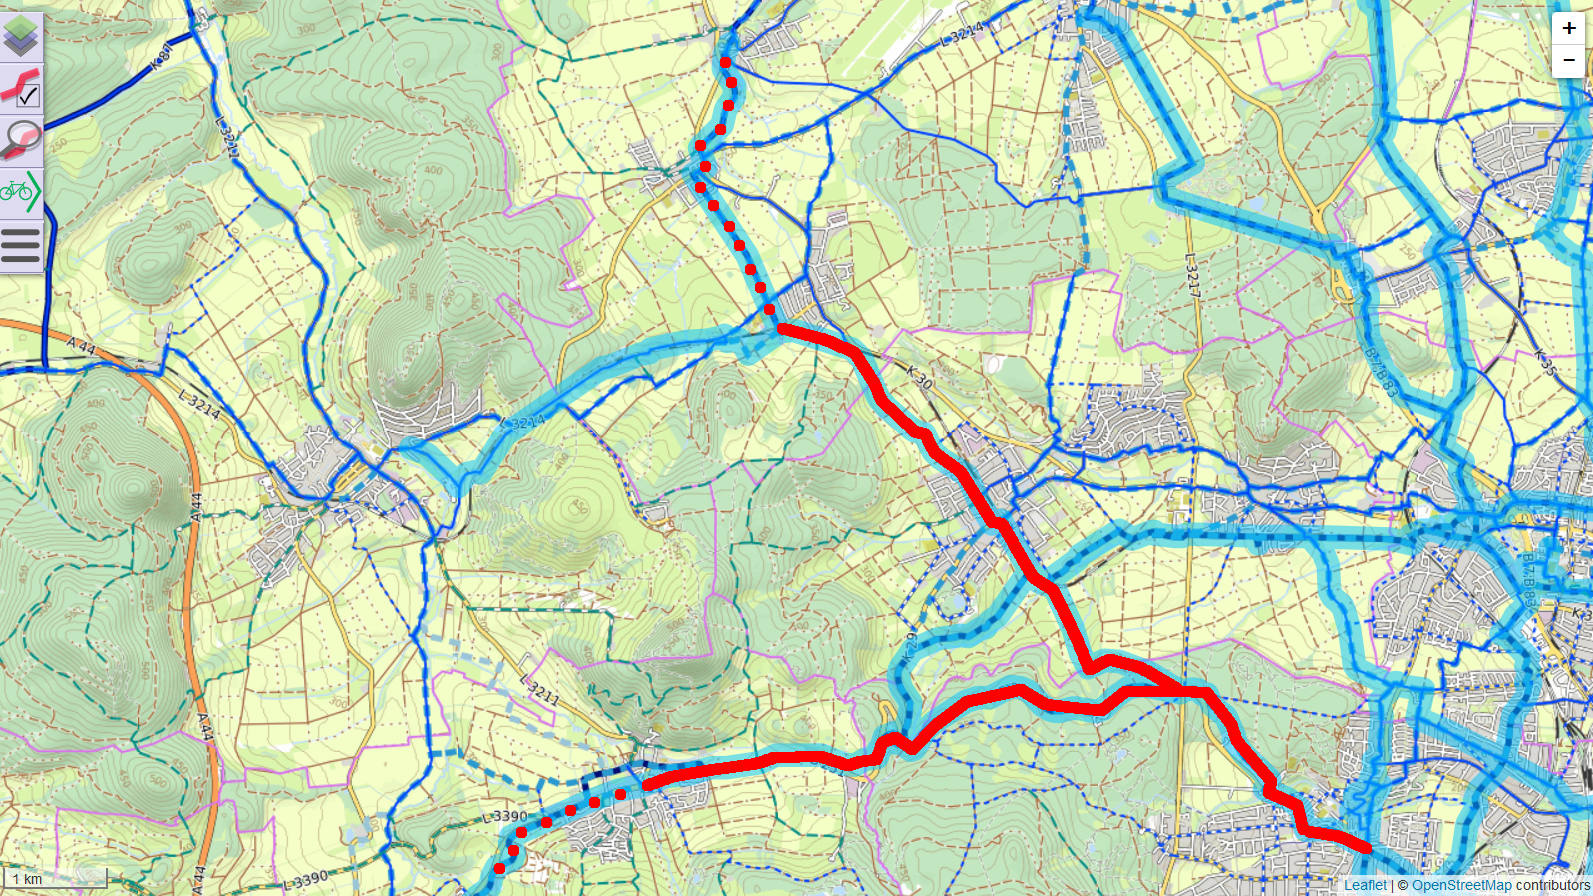 Image radpendlernetz_route_roter_pfahl